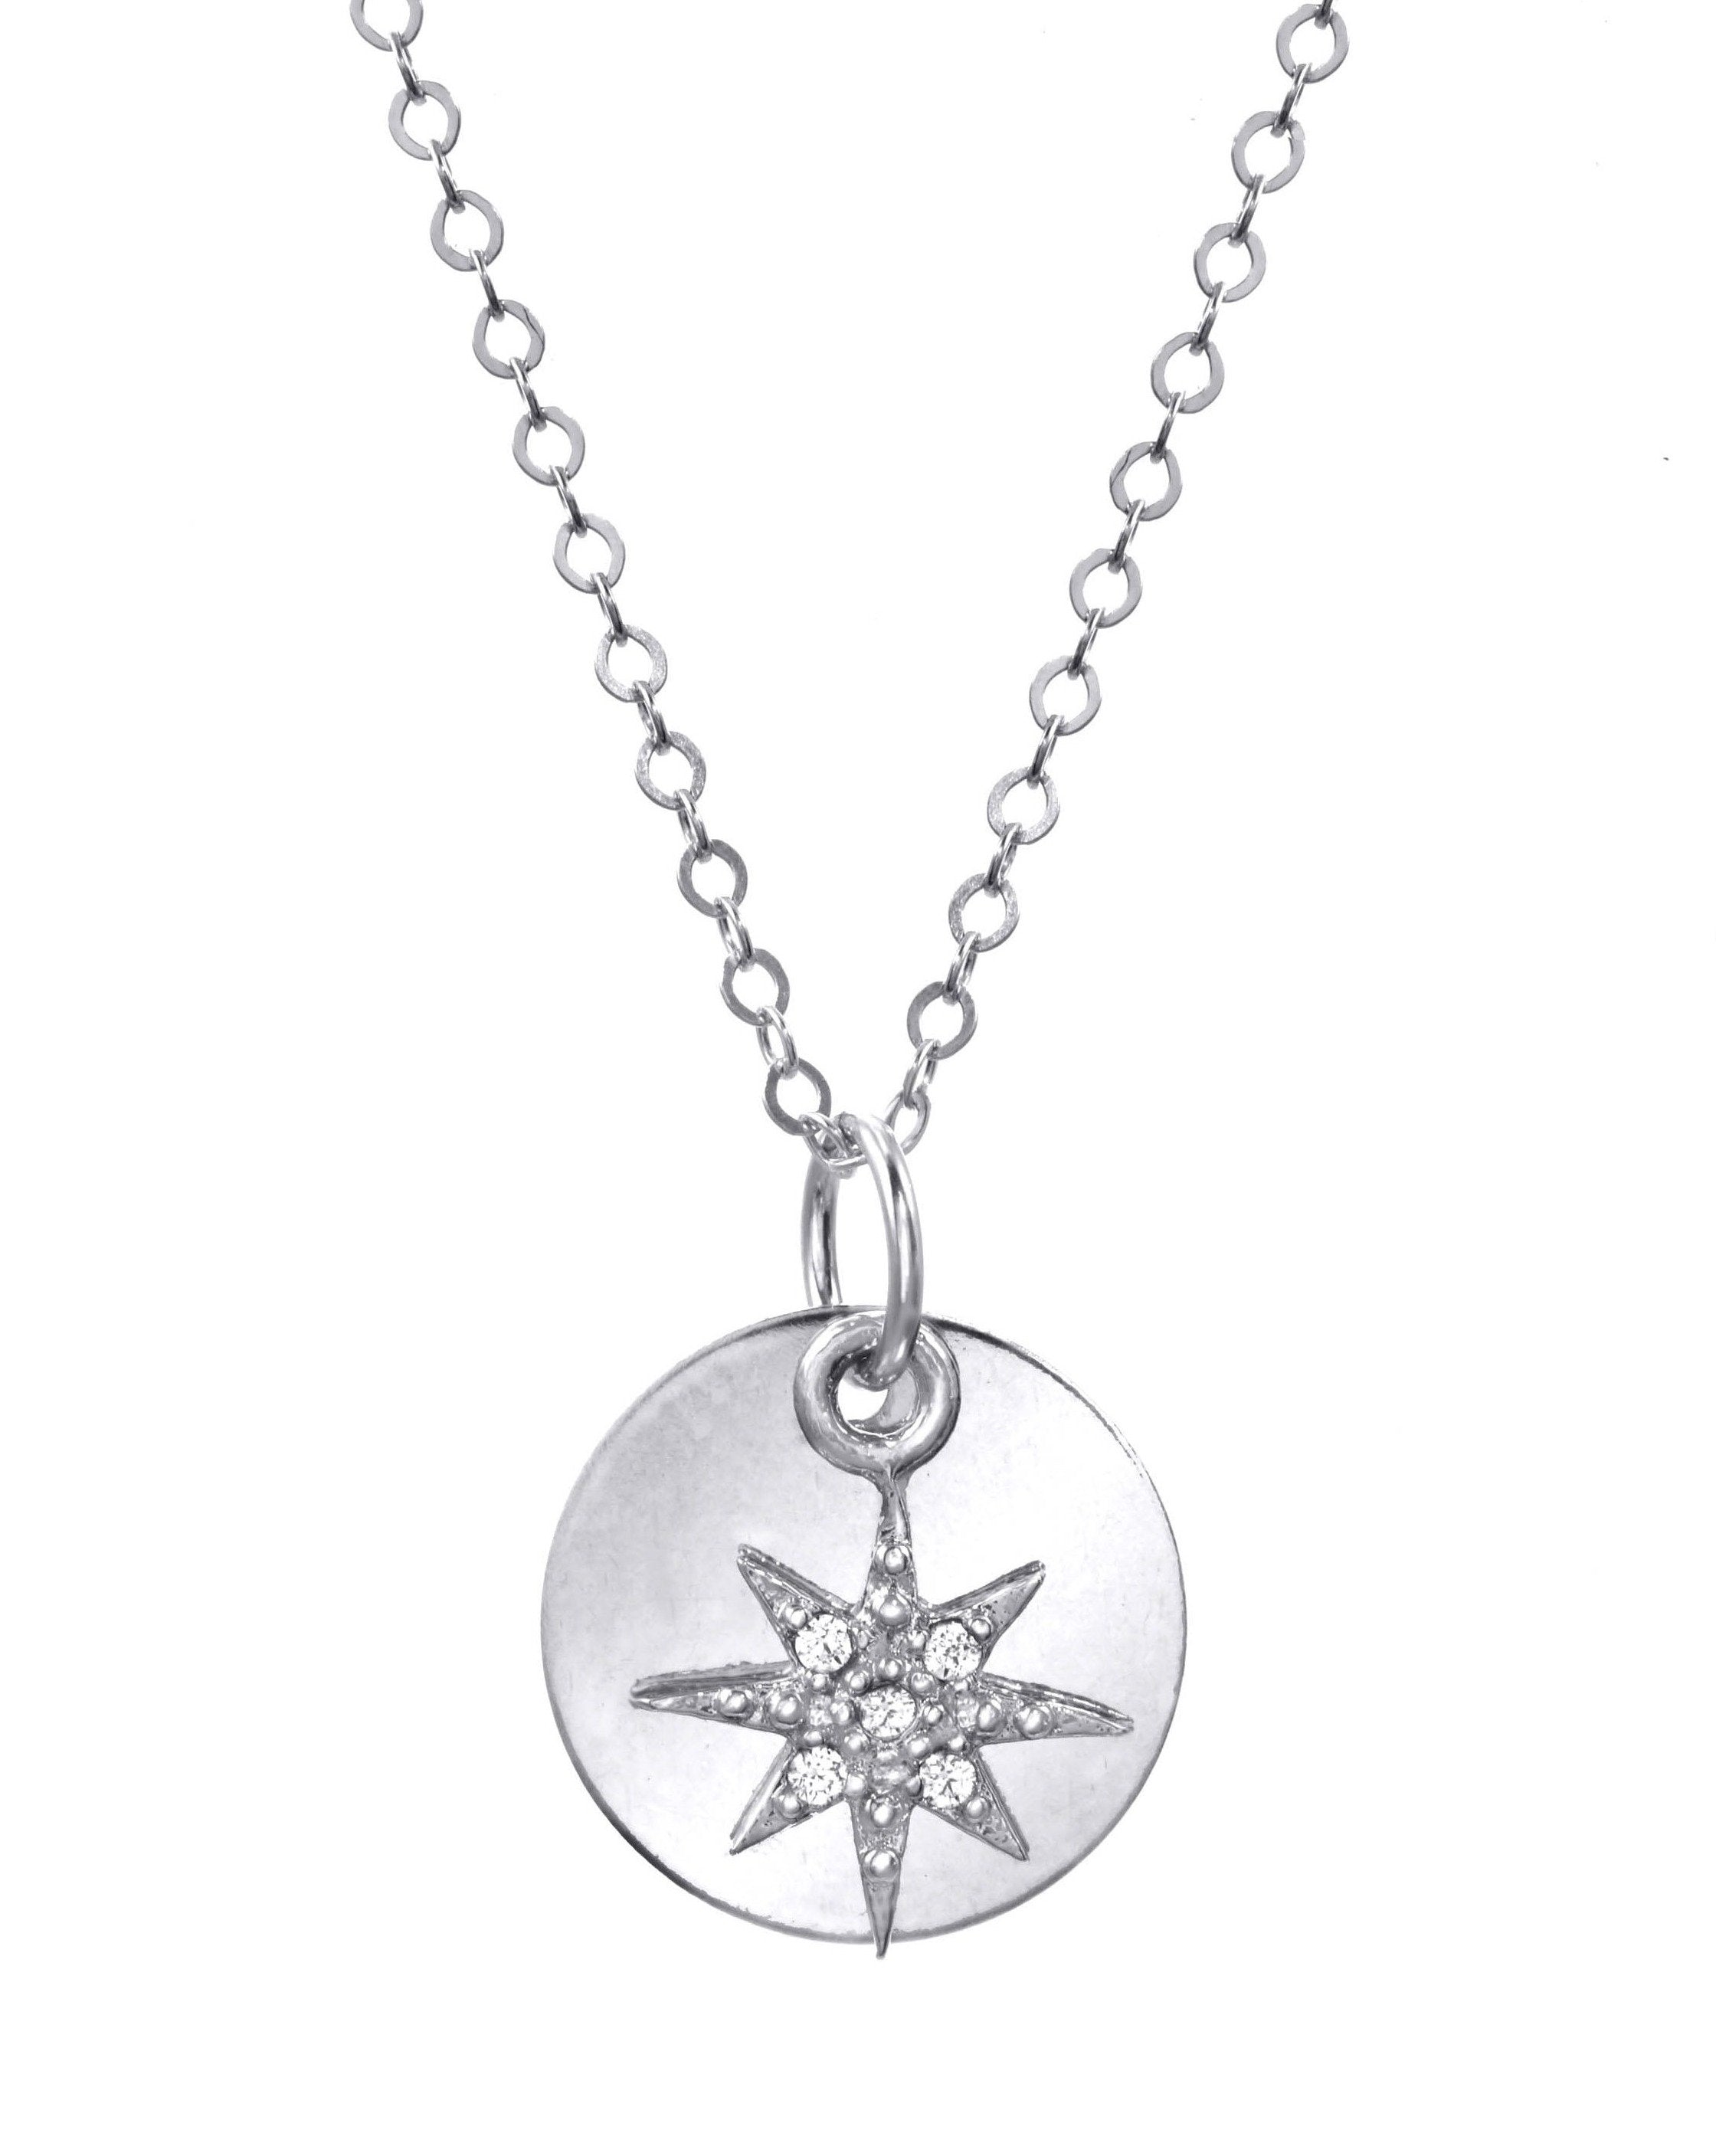 Adeena Necklace by KOZAKH. A 16 to 18 inch adjustable length necklace in Sterling Silver, featuring a coin charm and a Cubic Zirconia star charm.